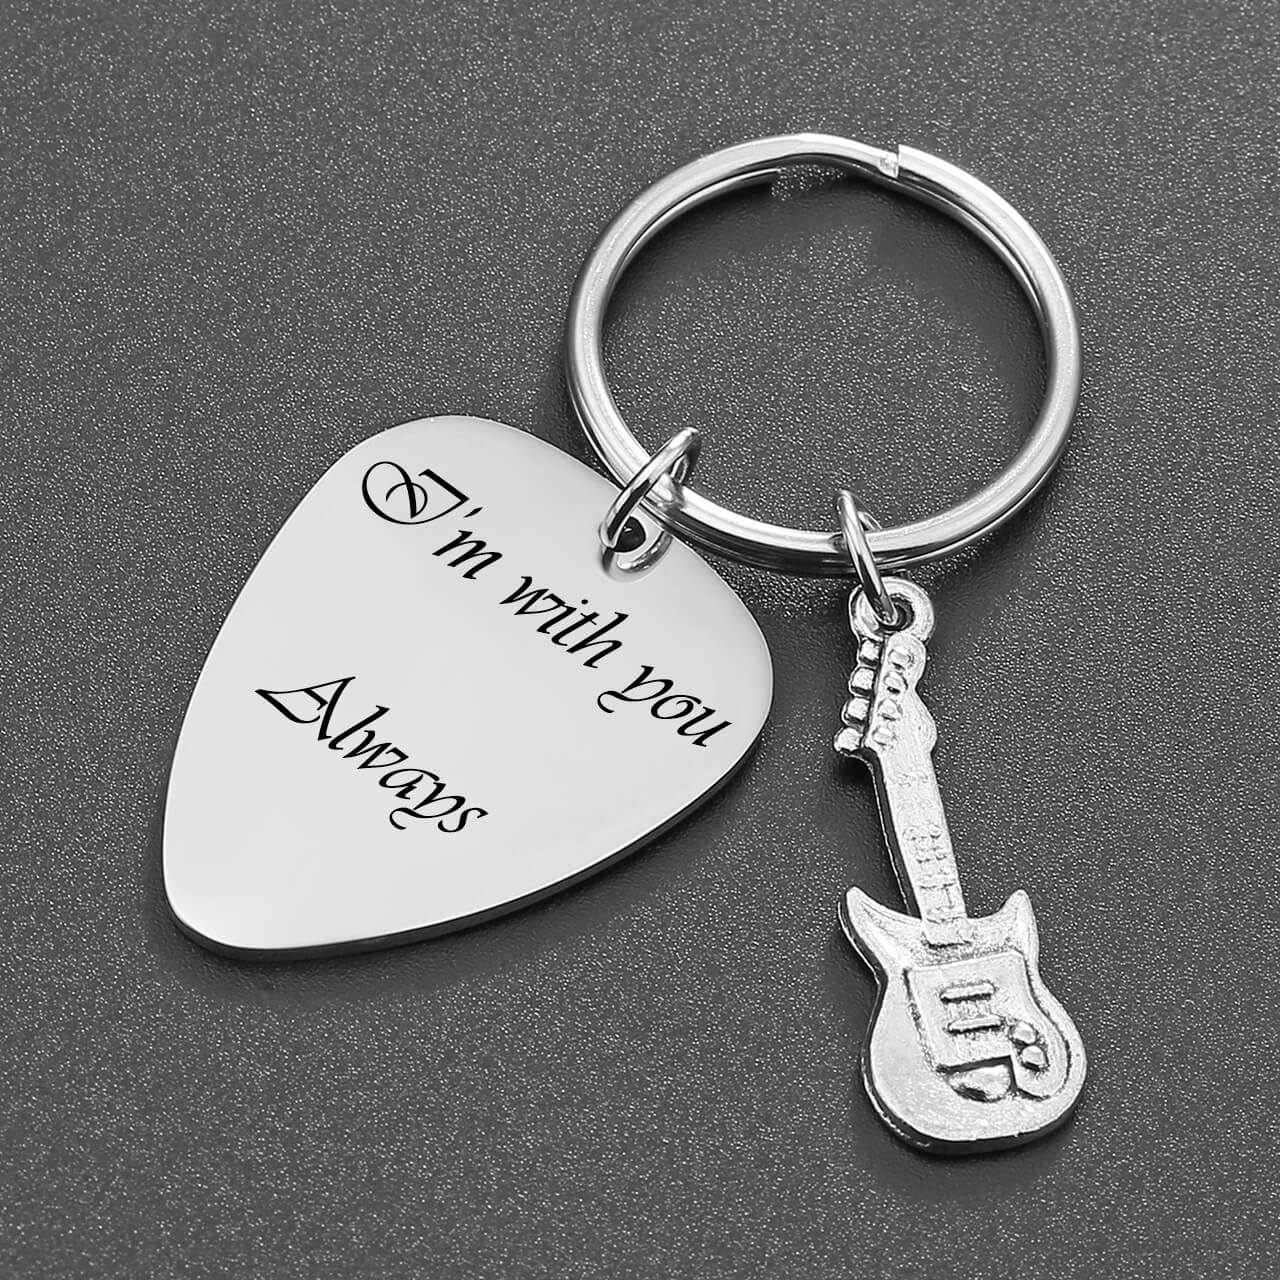 jnf001802 jovivi personalized customize guitar pick name tag keychain set for guitar lovers